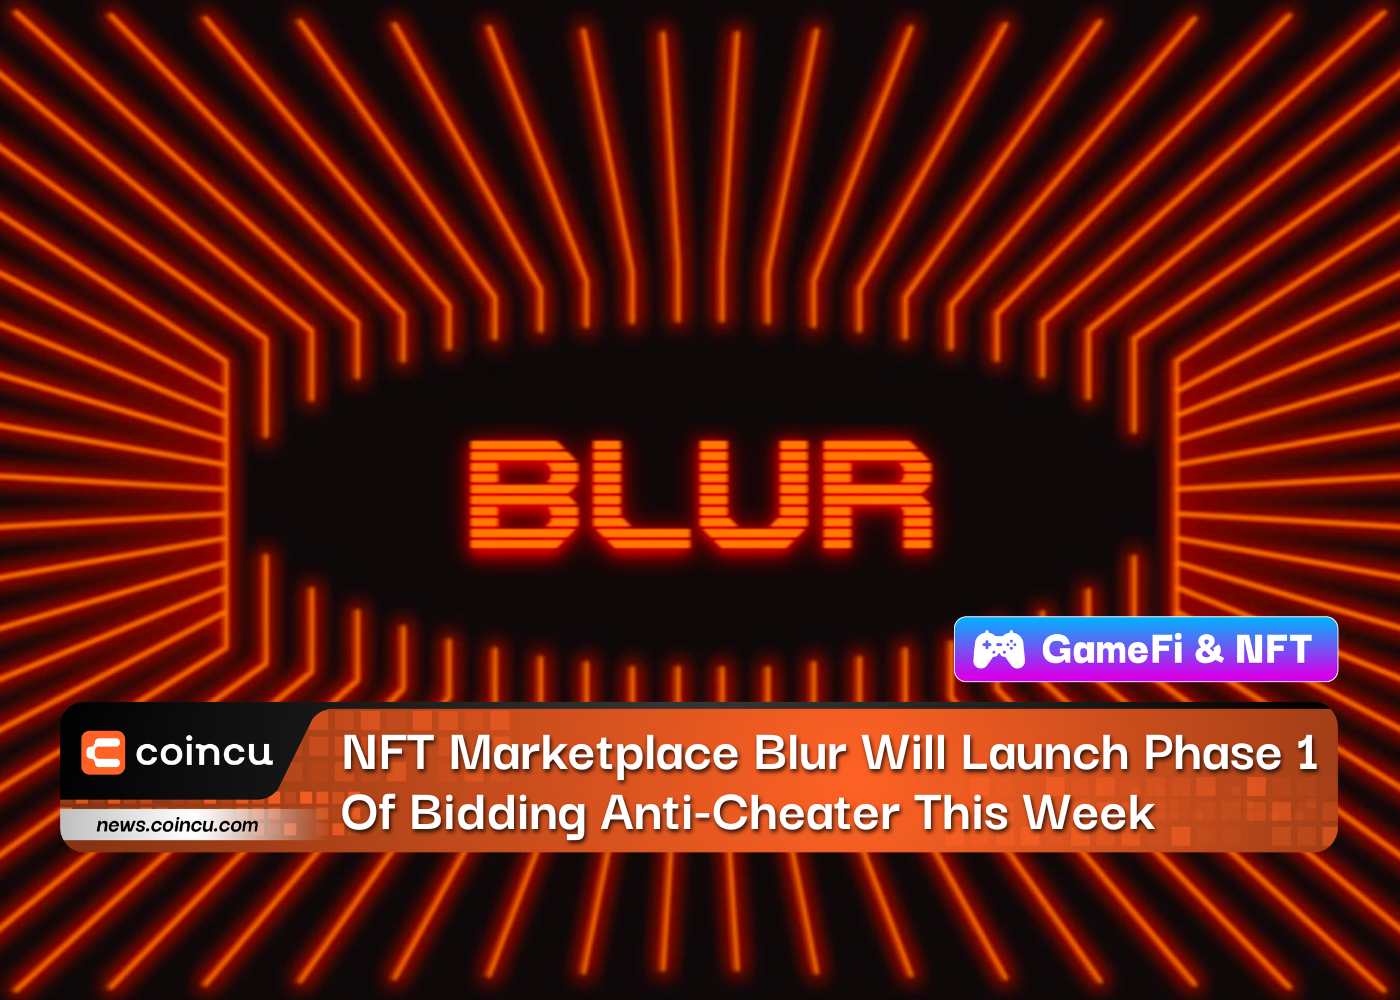 NFT Marketplace Blur Will Launch Phase 1 Of Bidding Anti-Cheater This Week